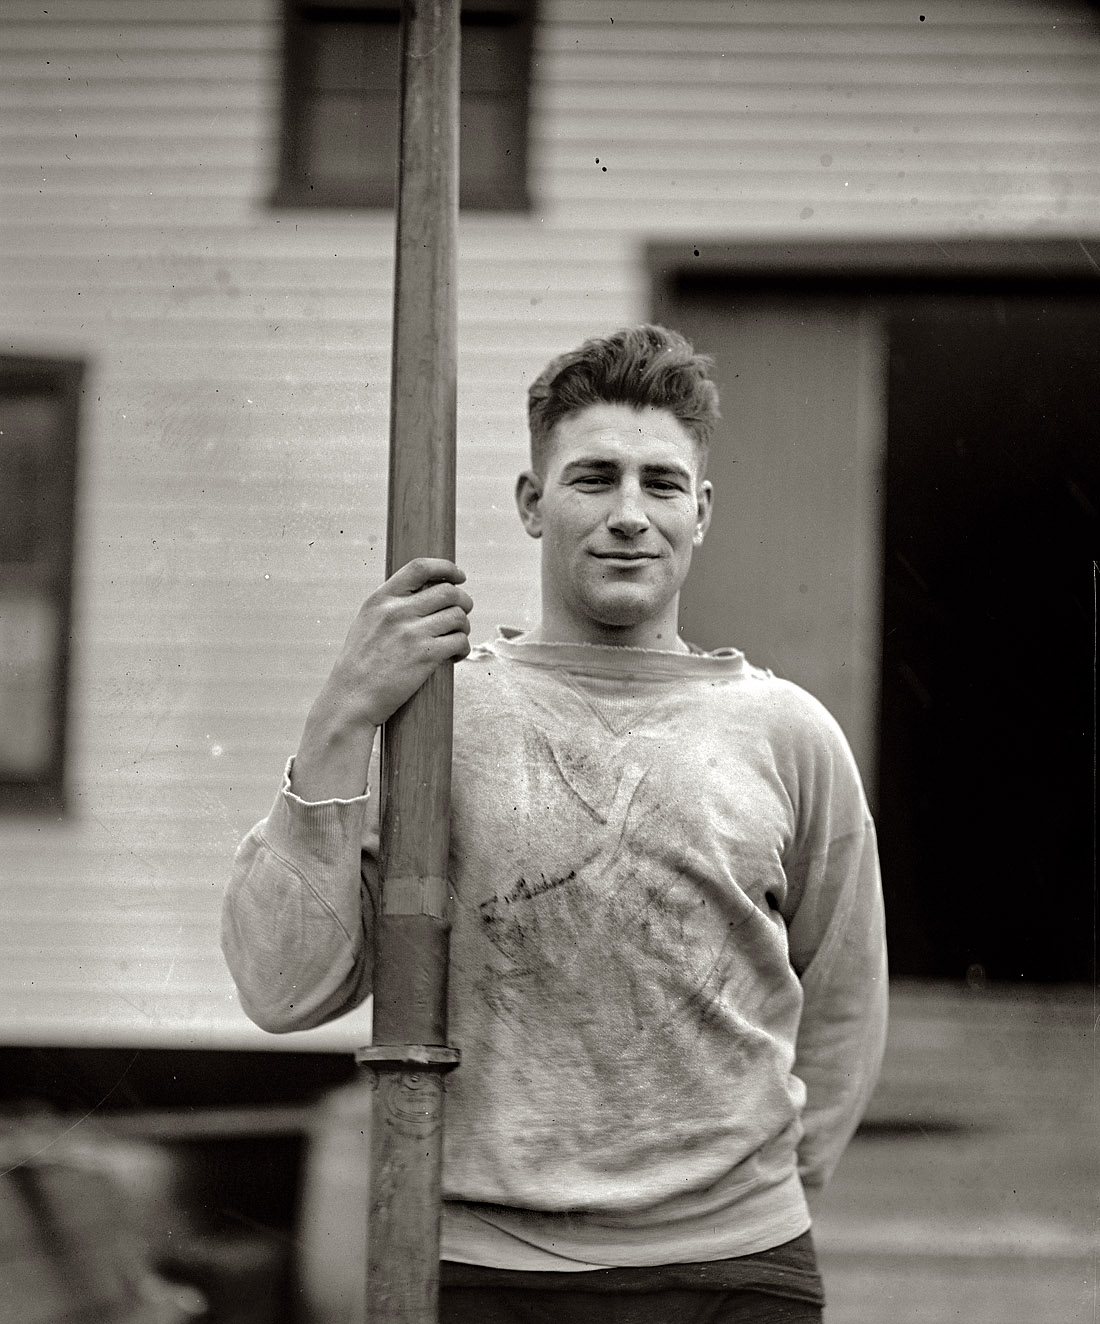 March 20, 1923. "H.A. Bolles, Annapolis. Crew Captain." View full size. National Photo Company Collection glass negative, Library of Congress.